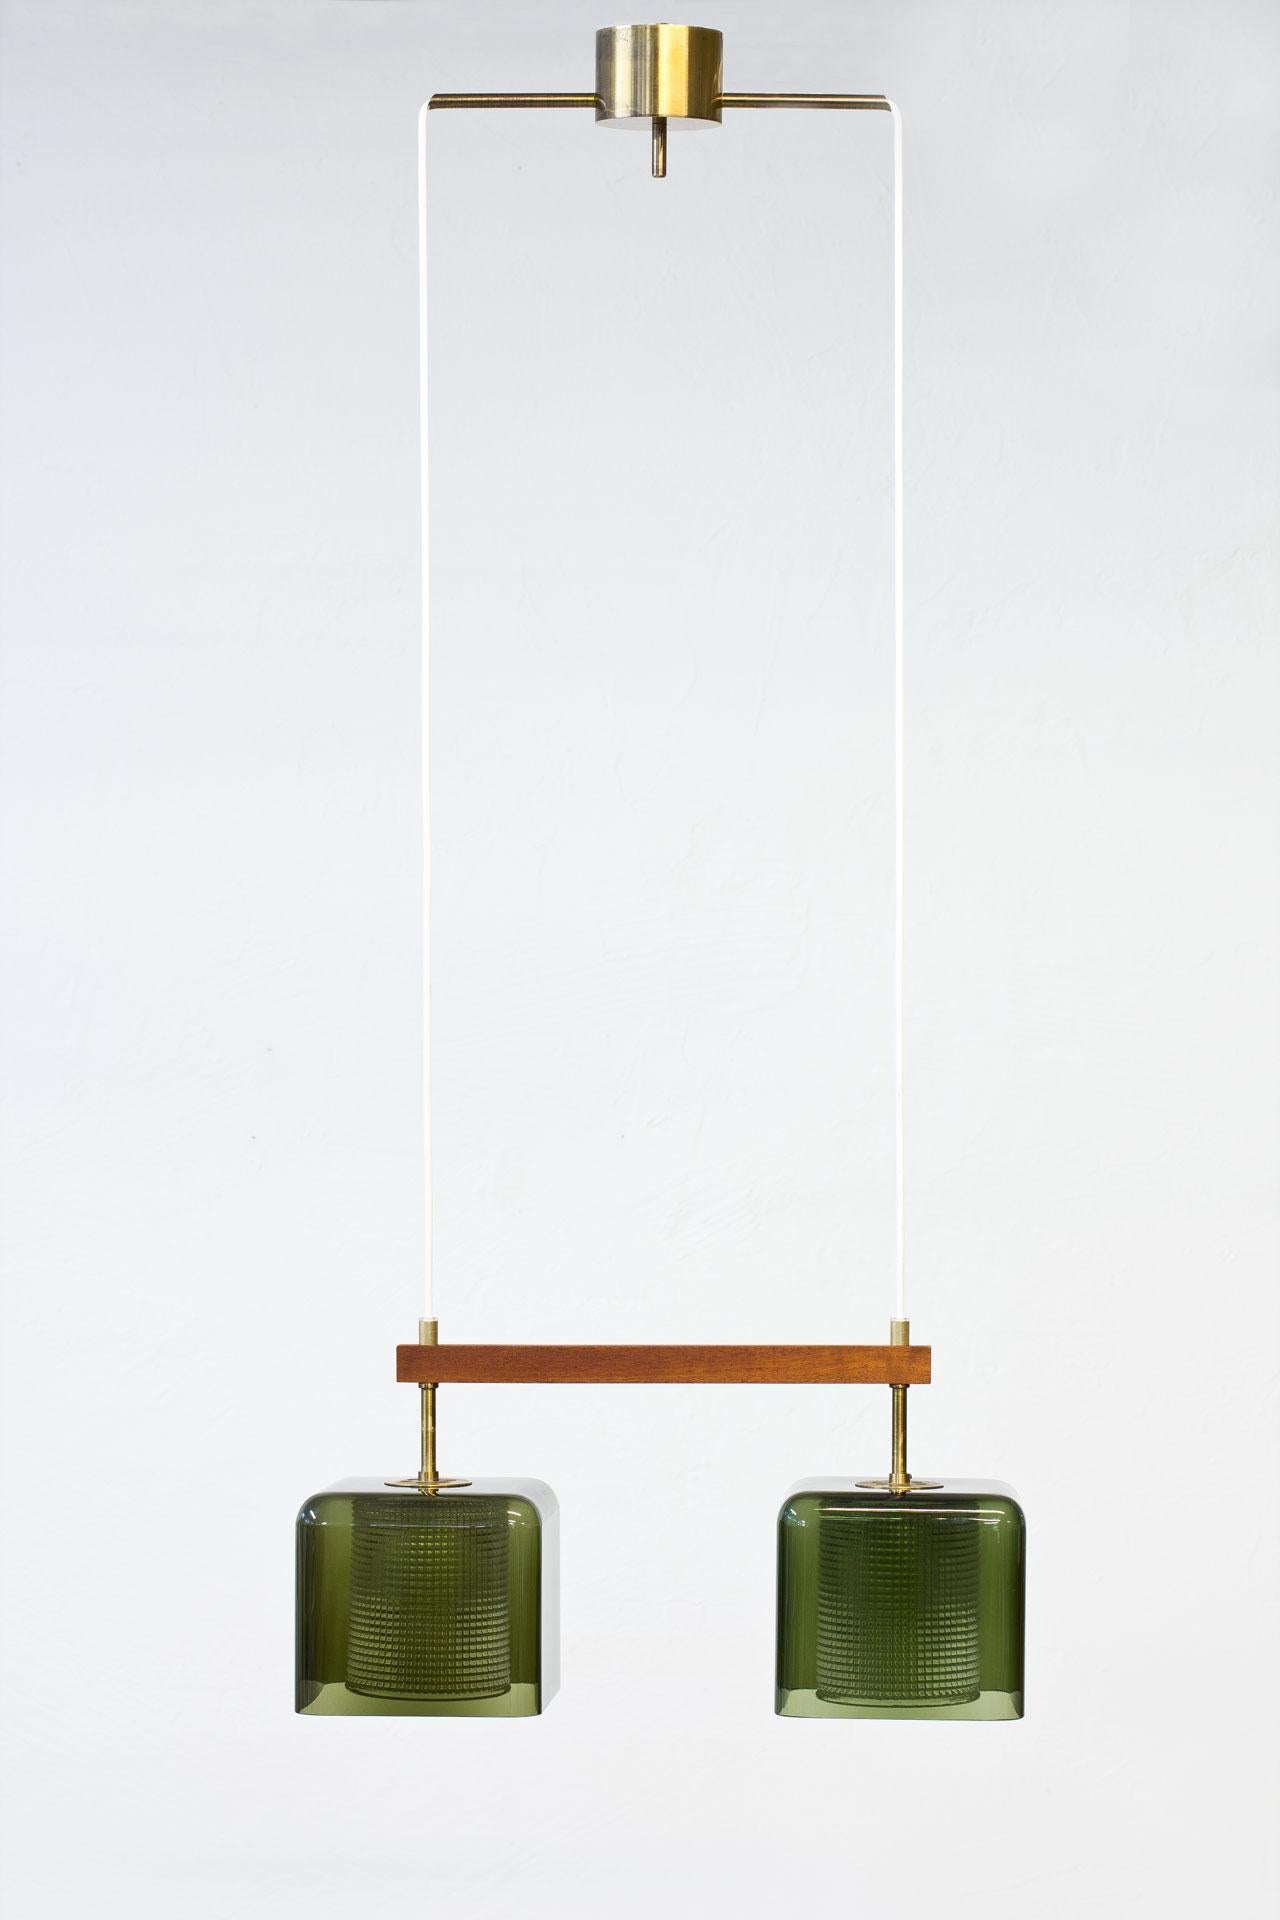 Pendant lamp designed by Carl Fagerlund for Swedish glass company Orrefors. 
Manufactured during the 1960s. 
Square shaped cups in green tinted glass with internal clear pressed glass diffuser, framed by a teak stretcher. Brass fittings with